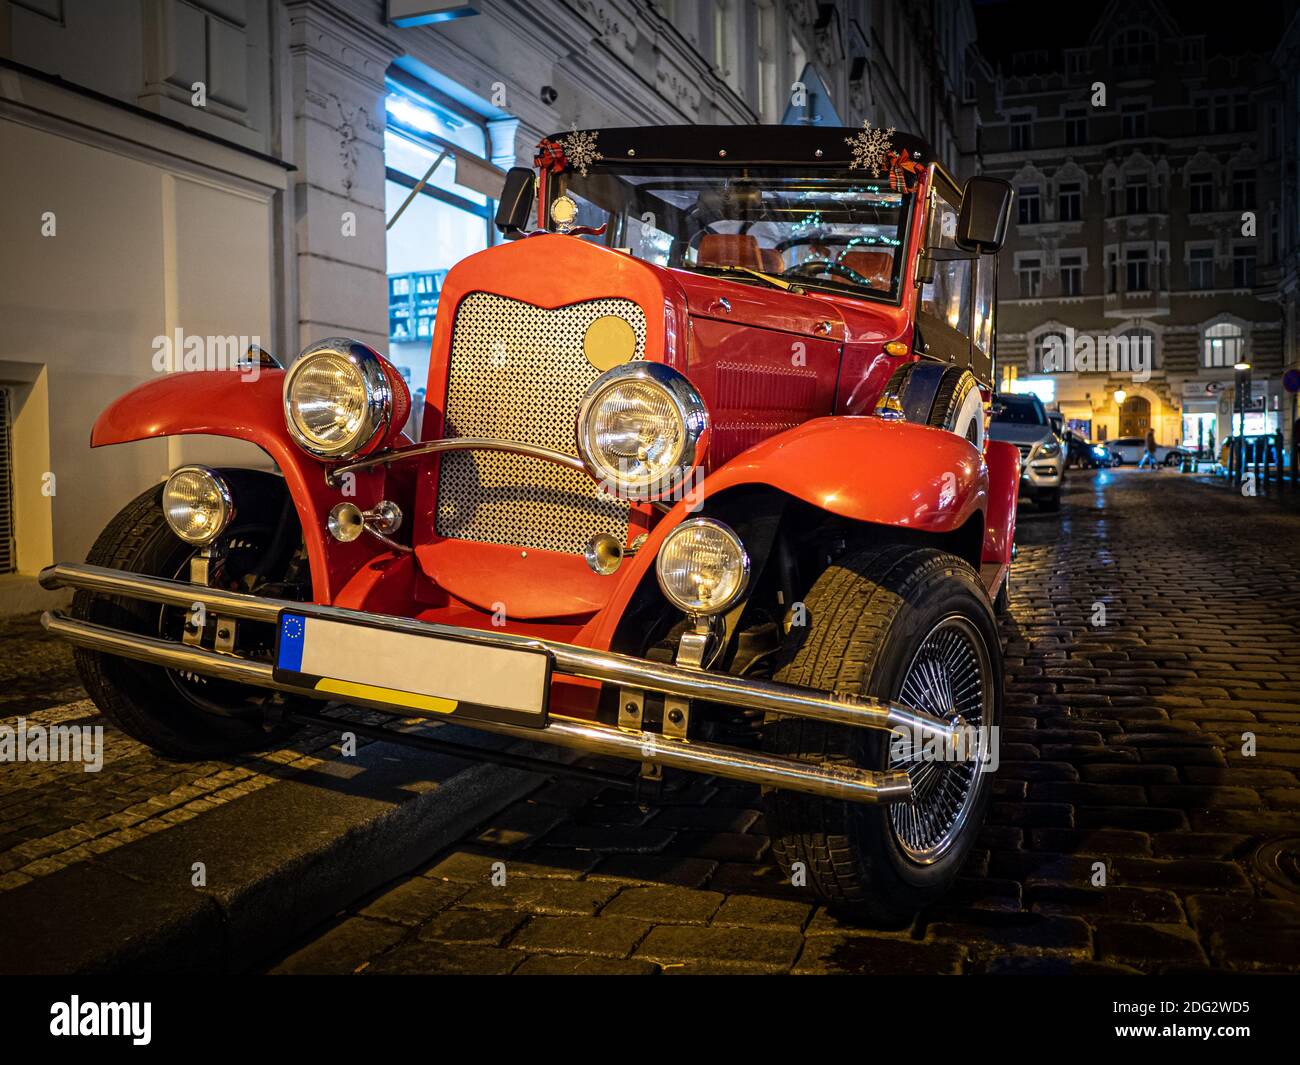 Red old vintage classic car on the night street Stock Photo